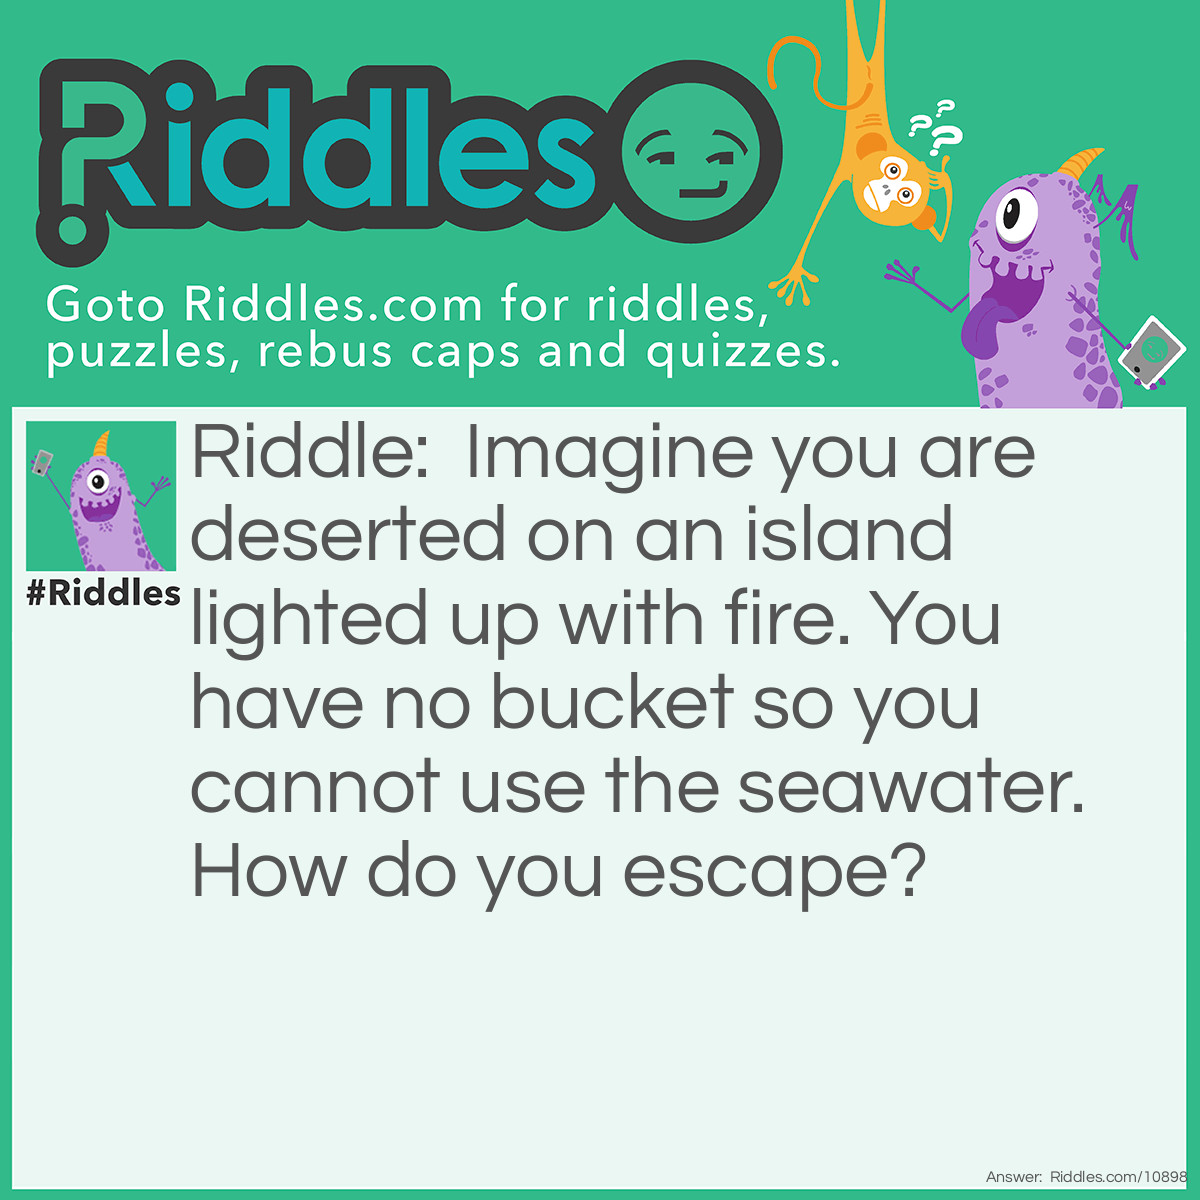 Riddle: Imagine you are deserted on an island lighted up with fire. You have no bucket so you cannot use the seawater. How do you escape? Answer: Just stop imagining.